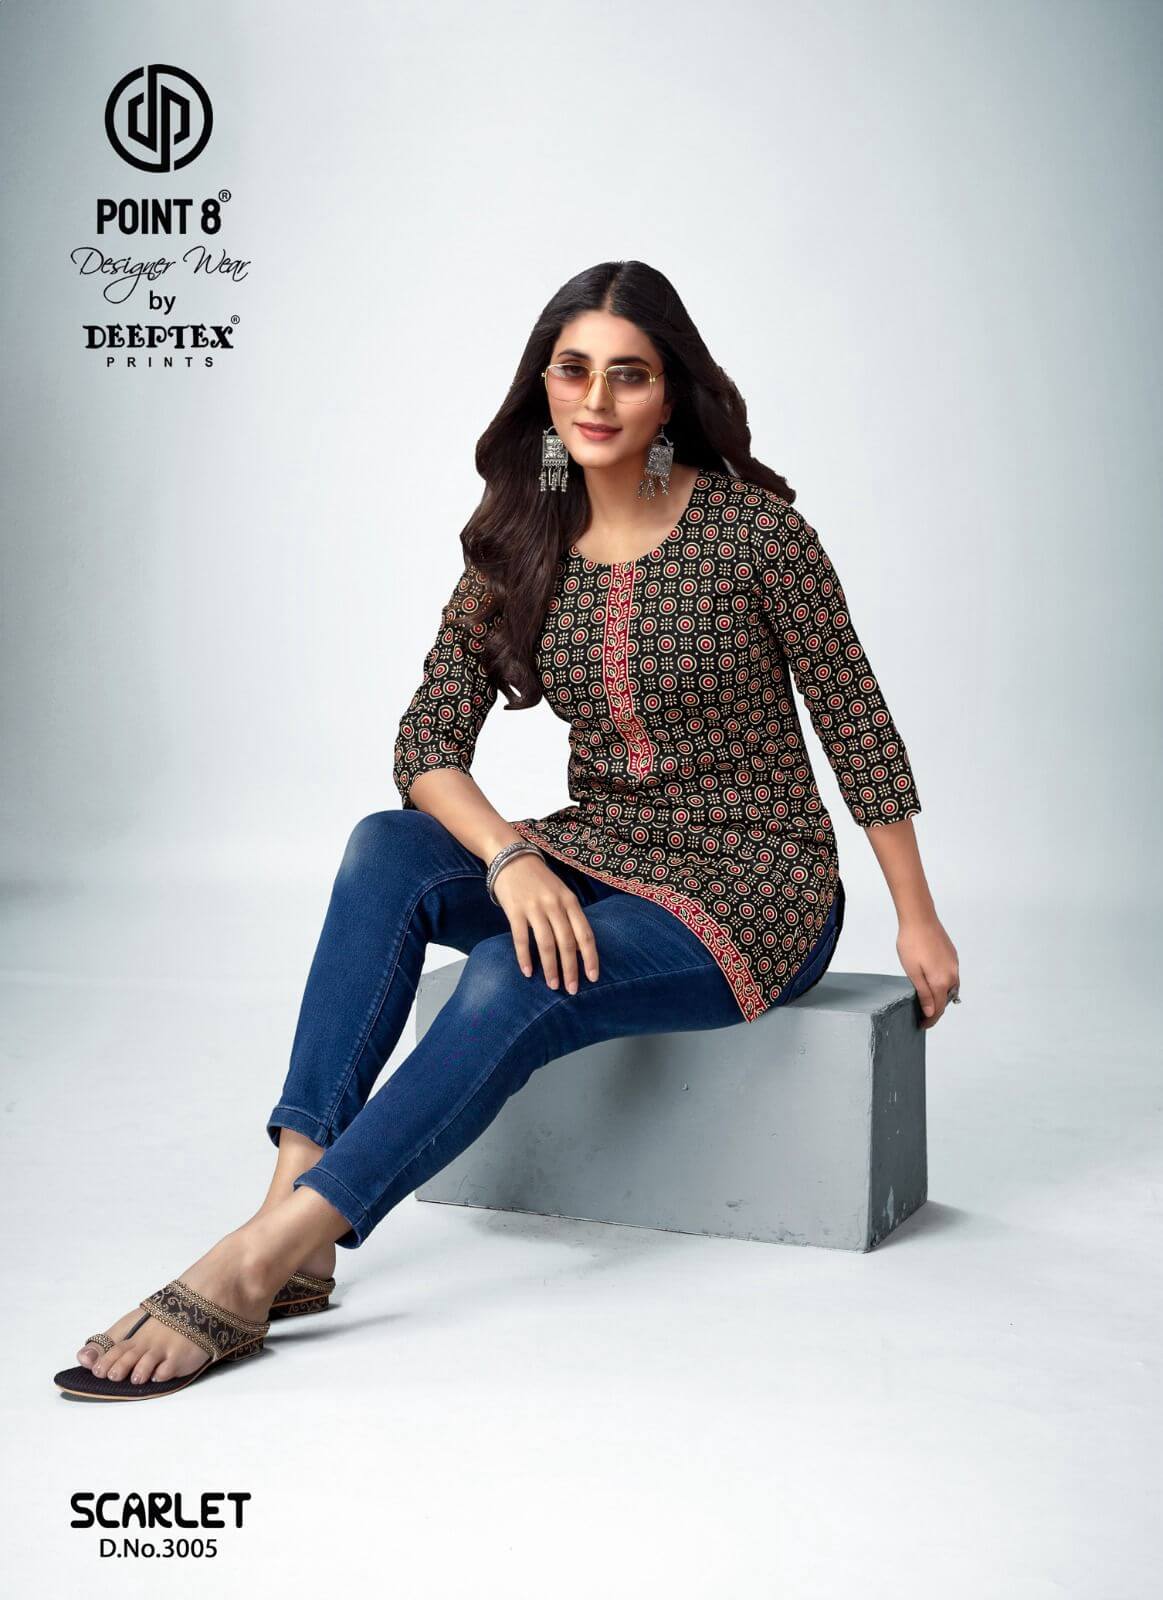 Deeptex Point 8 Scarlet Vol 3 Ladies Top Catalog collection 1